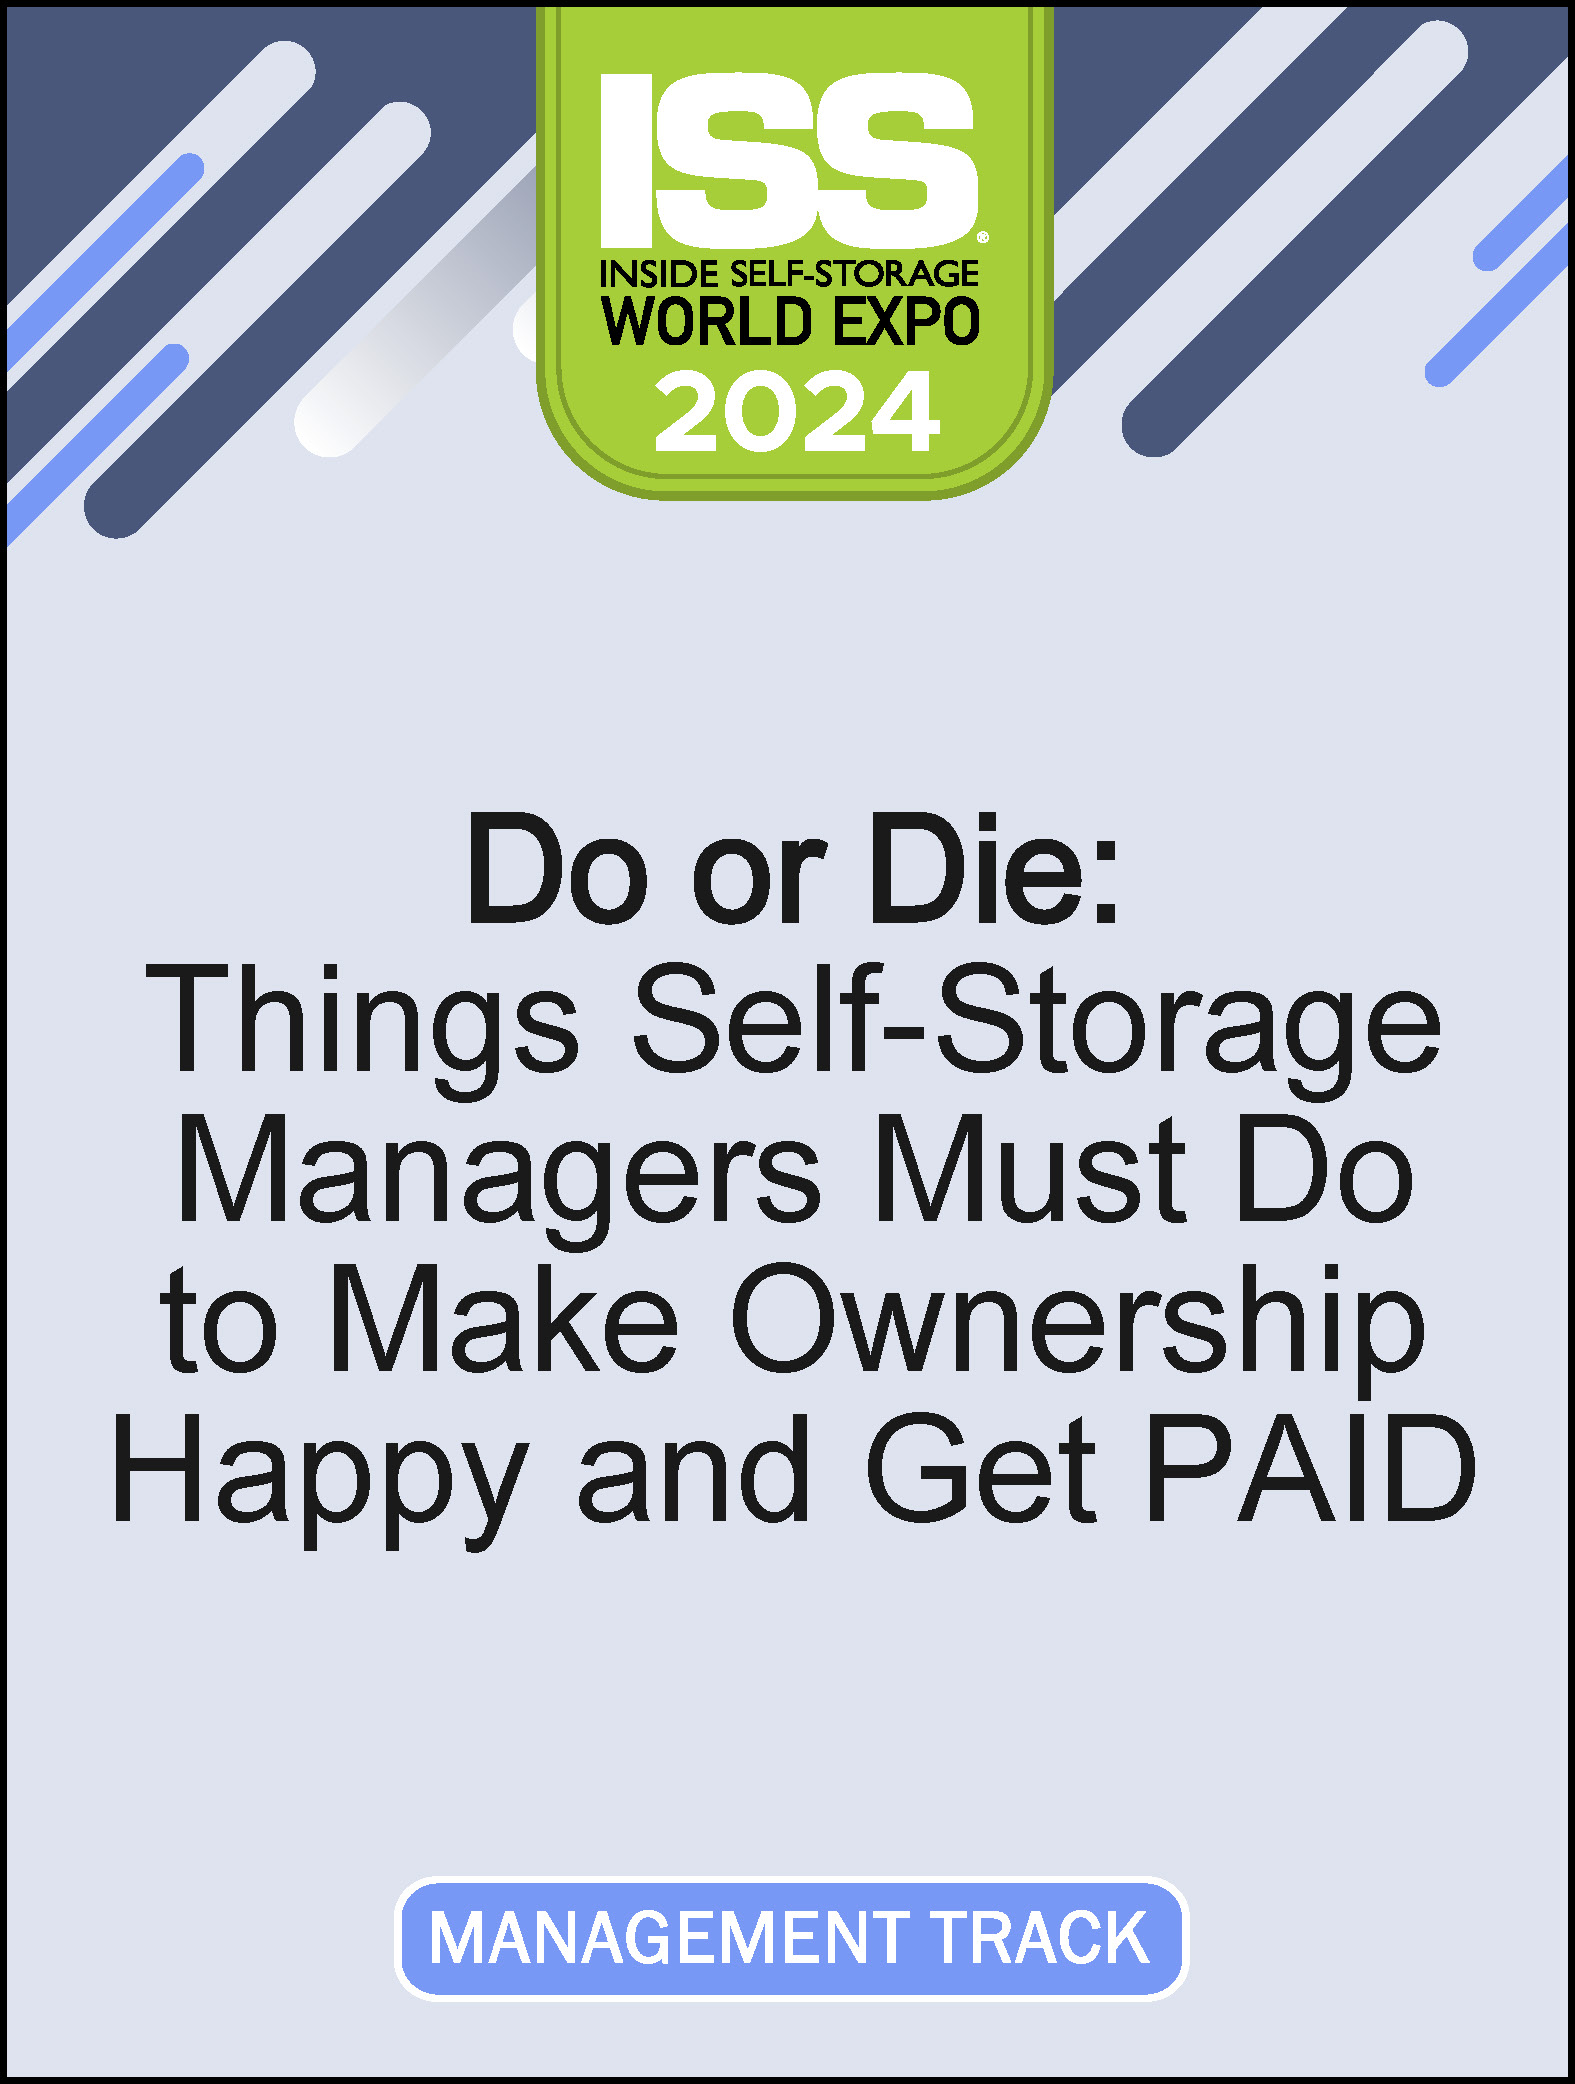 Video Pre-Order - Do or Die: Things Self-Storage Managers Must Do to Make Ownership Happy and Get PAID